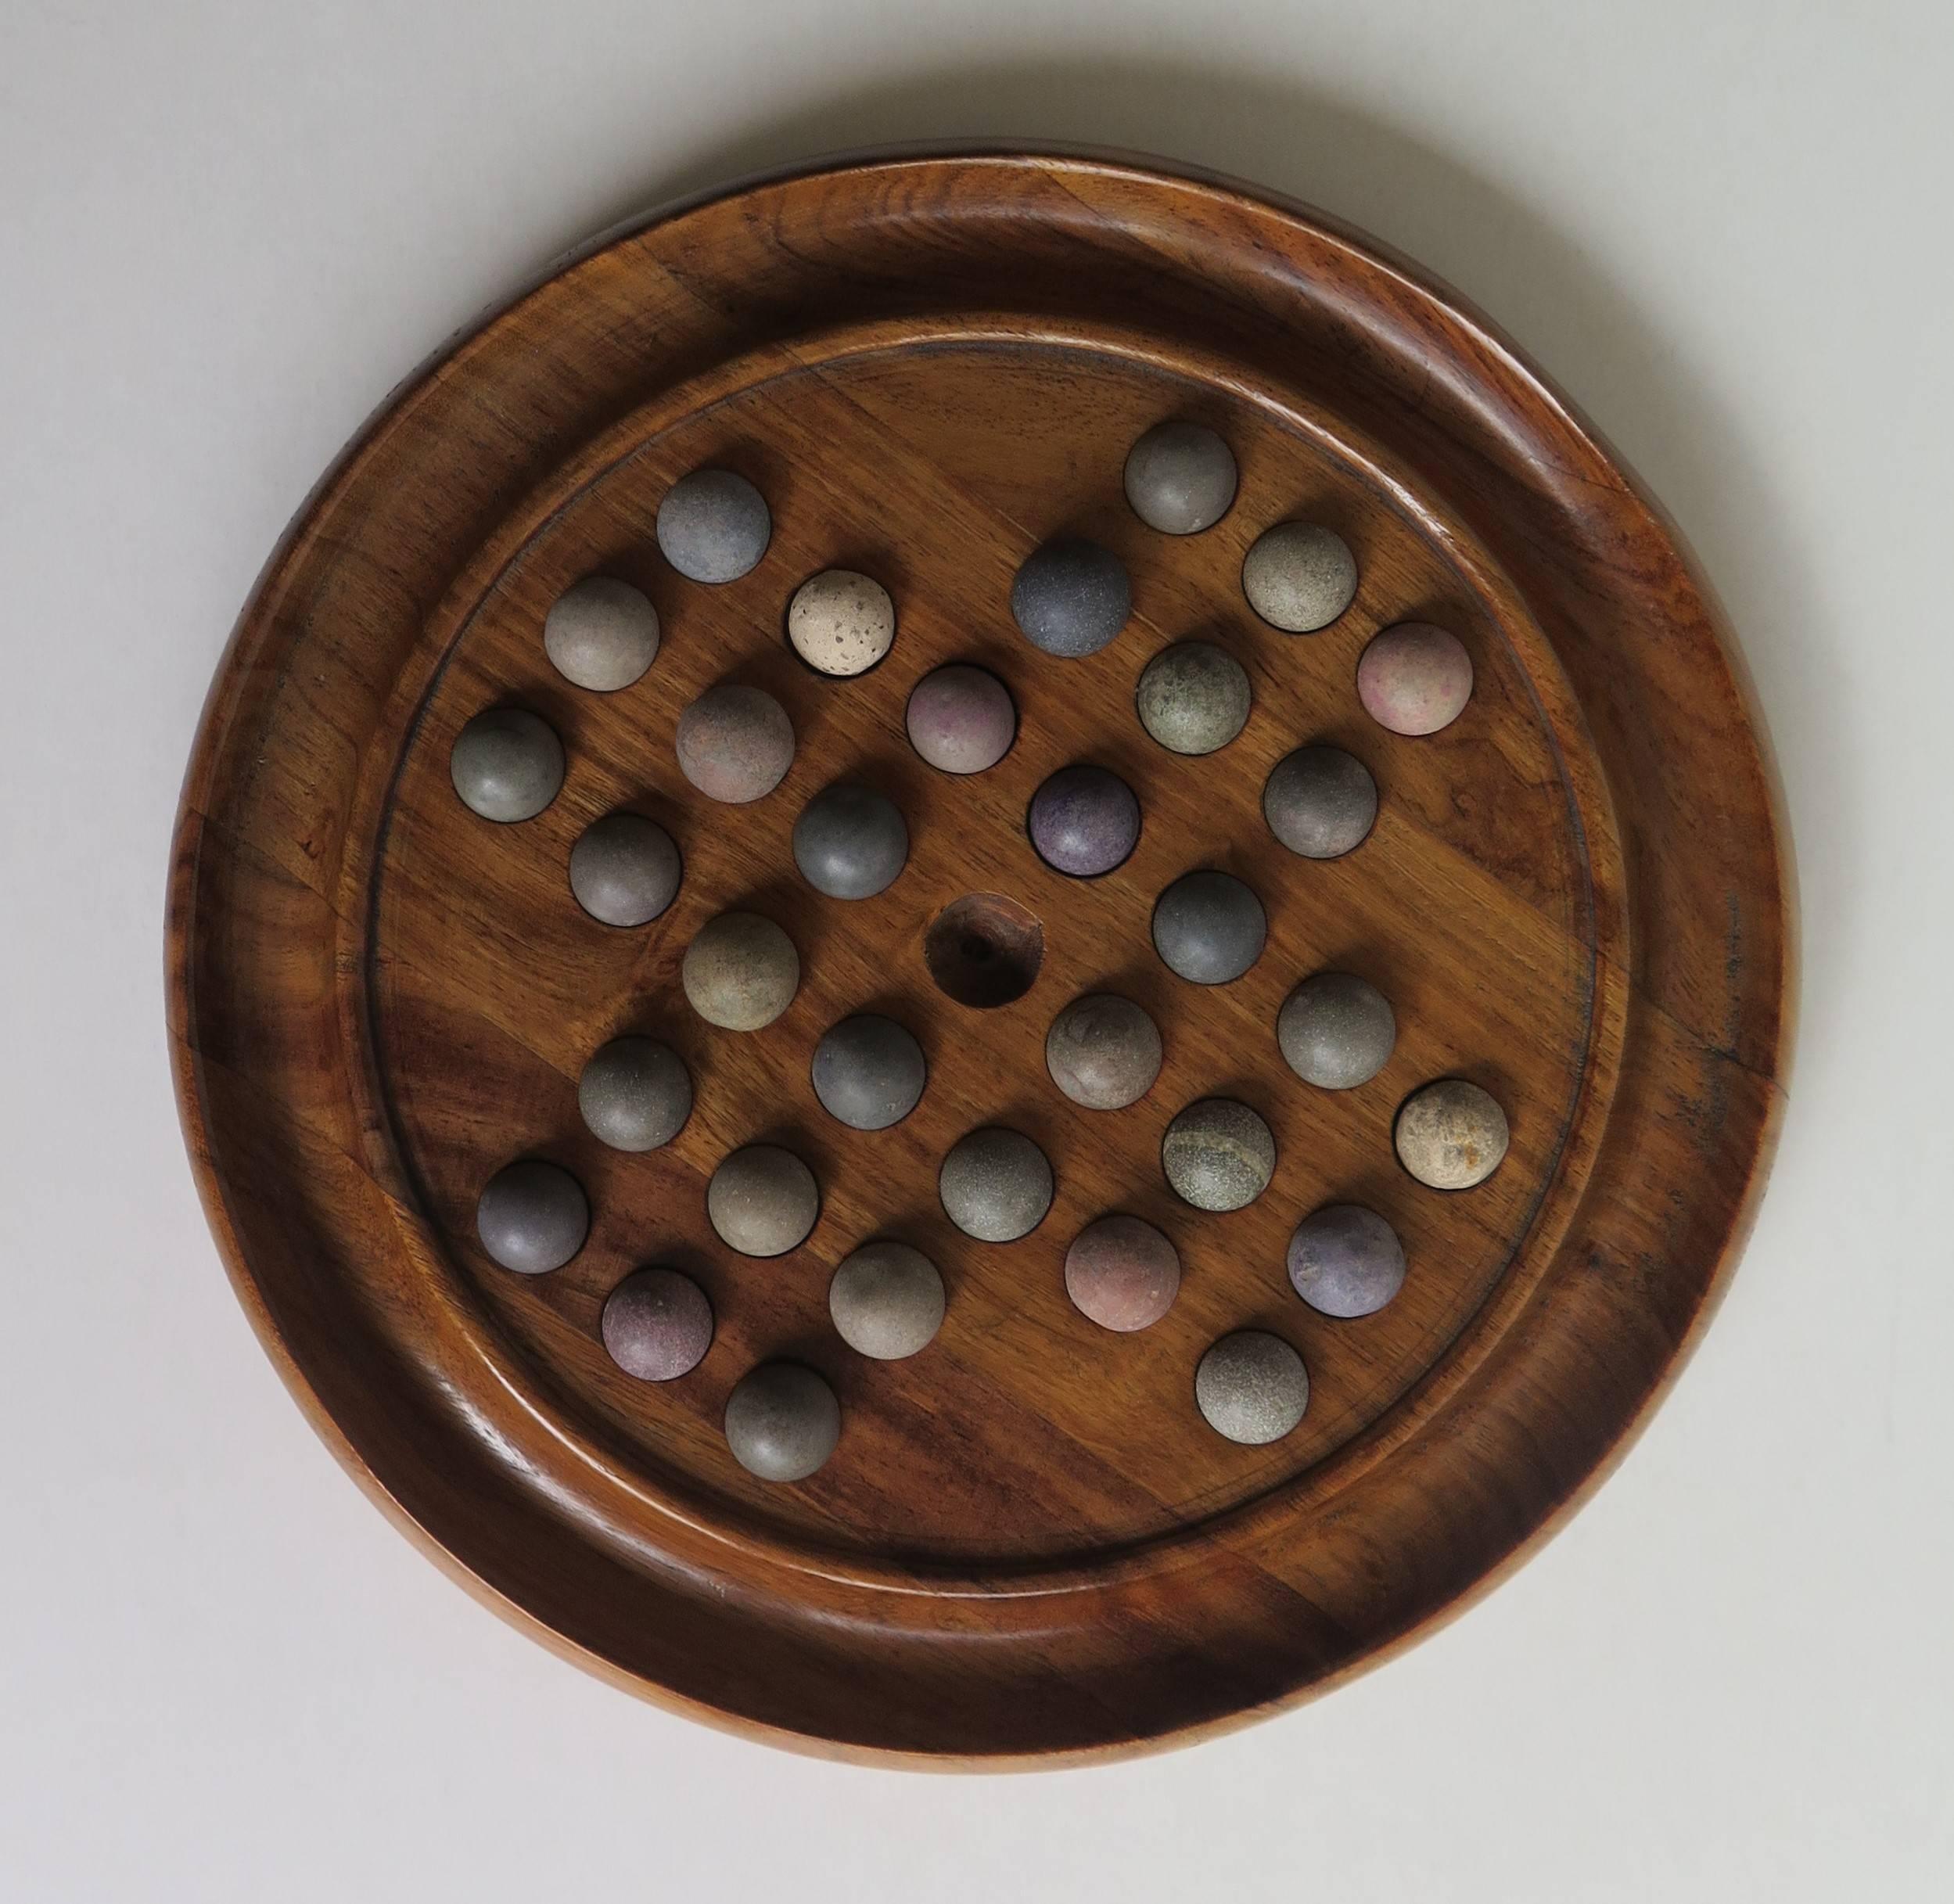 This is a small game of marble solitaire, having a very good board and a complete set of early marbles. 

The circular turned board is made of walnut and has an excellent grain and color. The board has 32 equi-spaced holes with an additional one